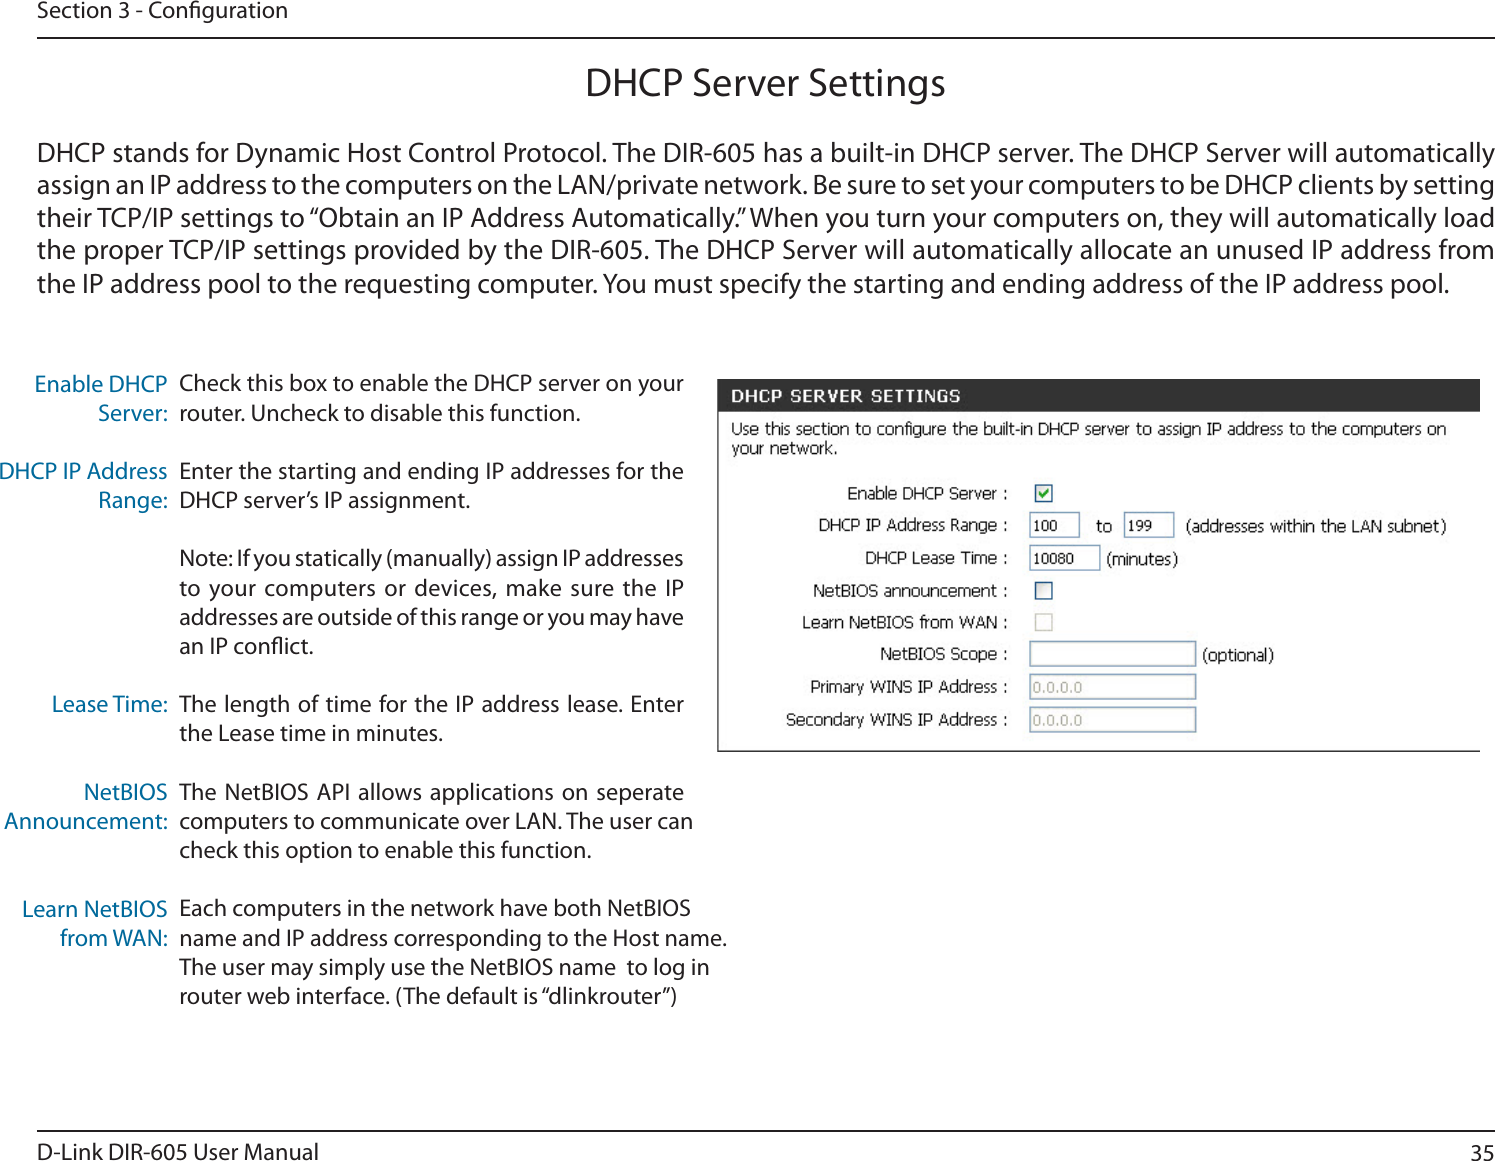 35D-Link DIR-605 User ManualSection 3 - CongurationCheck this box to enable the DHCP server on your router. Uncheck to disable this function.Enter the starting and ending IP addresses for the DHCP server’s IP assignment.Note: If you statically (manually) assign IP addresses to your computers or devices, make sure the IP addresses are outside of this range or you may have an IP conict. The length of time for the IP address lease. Enter the Lease time in minutes.The NetBIOS API allows applications on seperate computers to communicate over LAN. The user can check this option to enable this function.Each computers in the network have both NetBIOSname and IP address corresponding to the Host name.The user may simply use the NetBIOS name  to log inrouter web interface. (The default is “dlinkrouter”)Enable DHCP Server:DHCP IP Address Range:Lease Time:NetBIOSAnnouncement:Learn NetBIOSfrom WAN:DHCP Server SettingsDHCP stands for Dynamic Host Control Protocol. The DIR-605 has a built-in DHCP server. The DHCP Server will automatically assign an IP address to the computers on the LAN/private network. Be sure to set your computers to be DHCP clients by setting their TCP/IP settings to “Obtain an IP Address Automatically.” When you turn your computers on, they will automatically load the proper TCP/IP settings provided by the DIR-605. The DHCP Server will automatically allocate an unused IP address from UIF*1BEESFTTQPPMUPUIFSFRVFTUJOHDPNQVUFS:PVNVTUTQFDJGZUIFTUBSUJOHBOEFOEJOHBEESFTTPGUIF*1BEESFTTQPPM